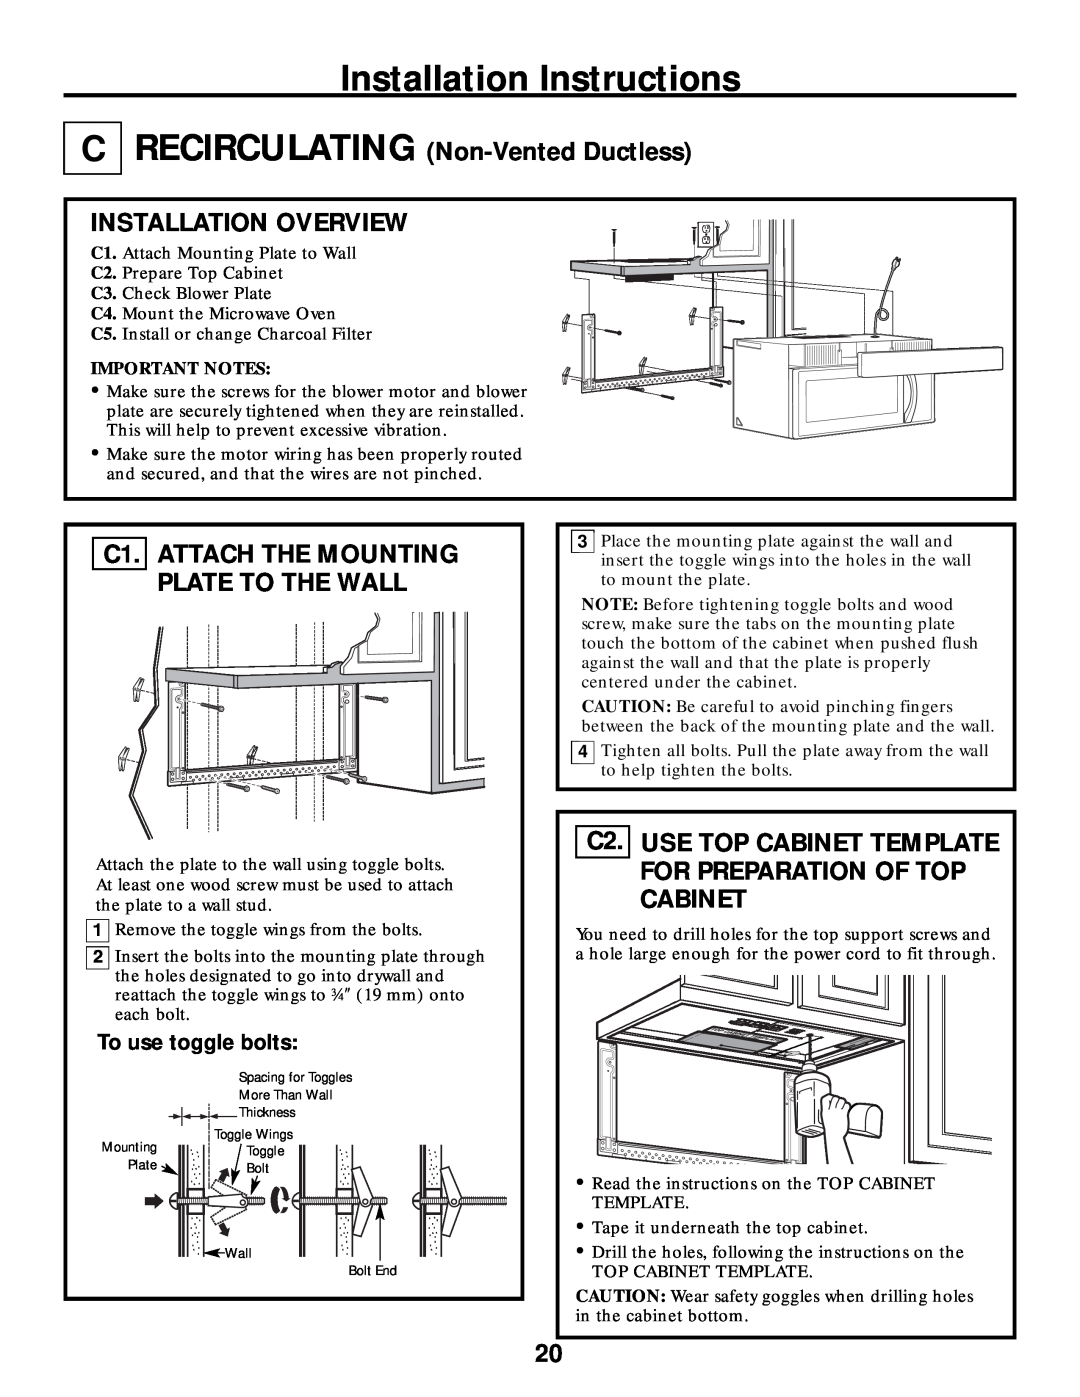 Frigidaire 316495063 RECIRCULATING Non-Vented Ductless, C1. ATTACH THE MOUNTING PLATE TO THE WALL, Installation Overview 